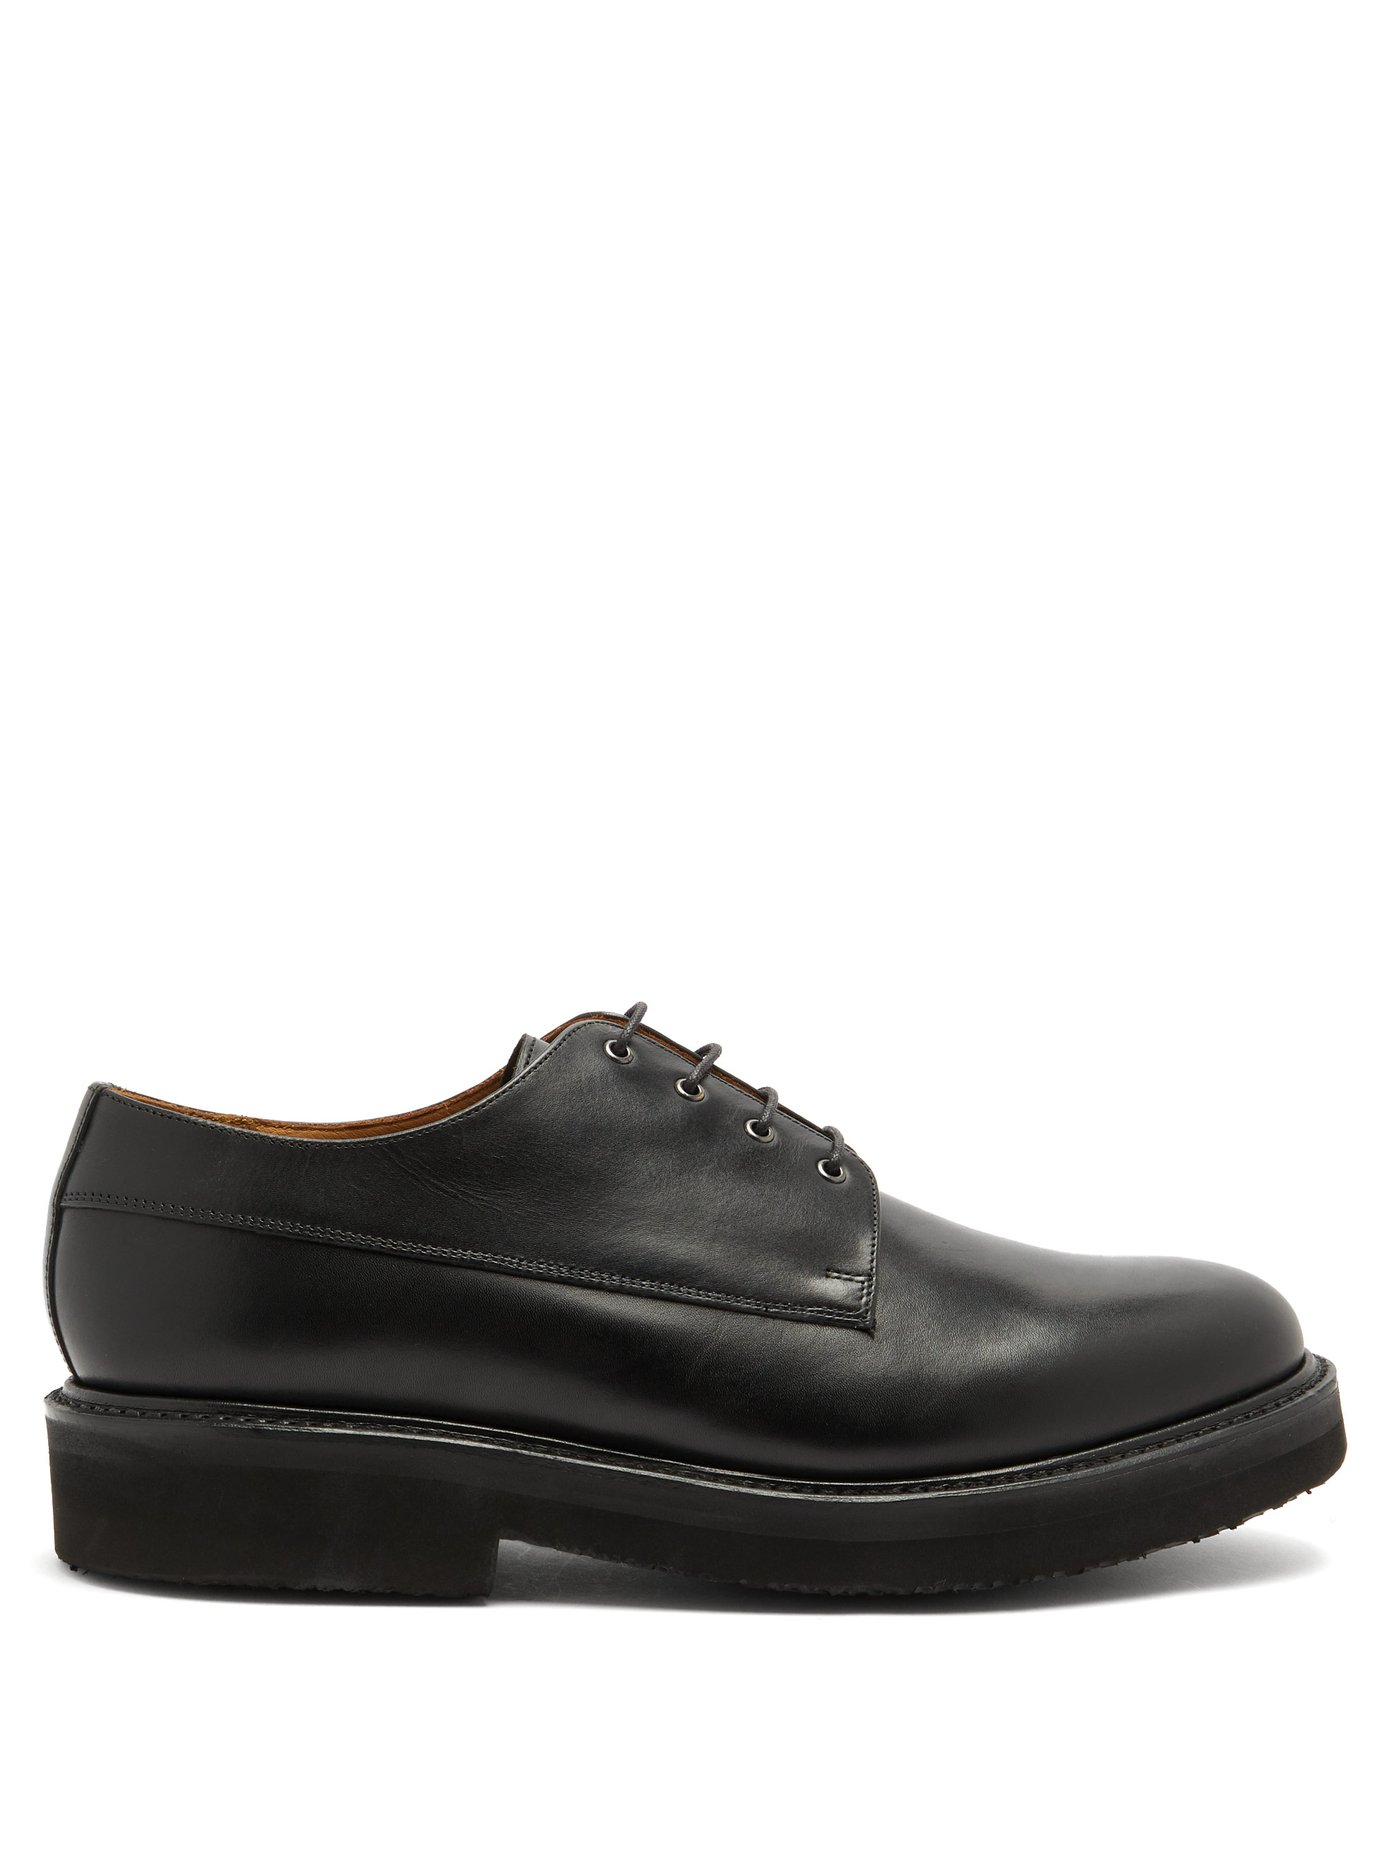 Hurley leather Derby shoes | Grenson 